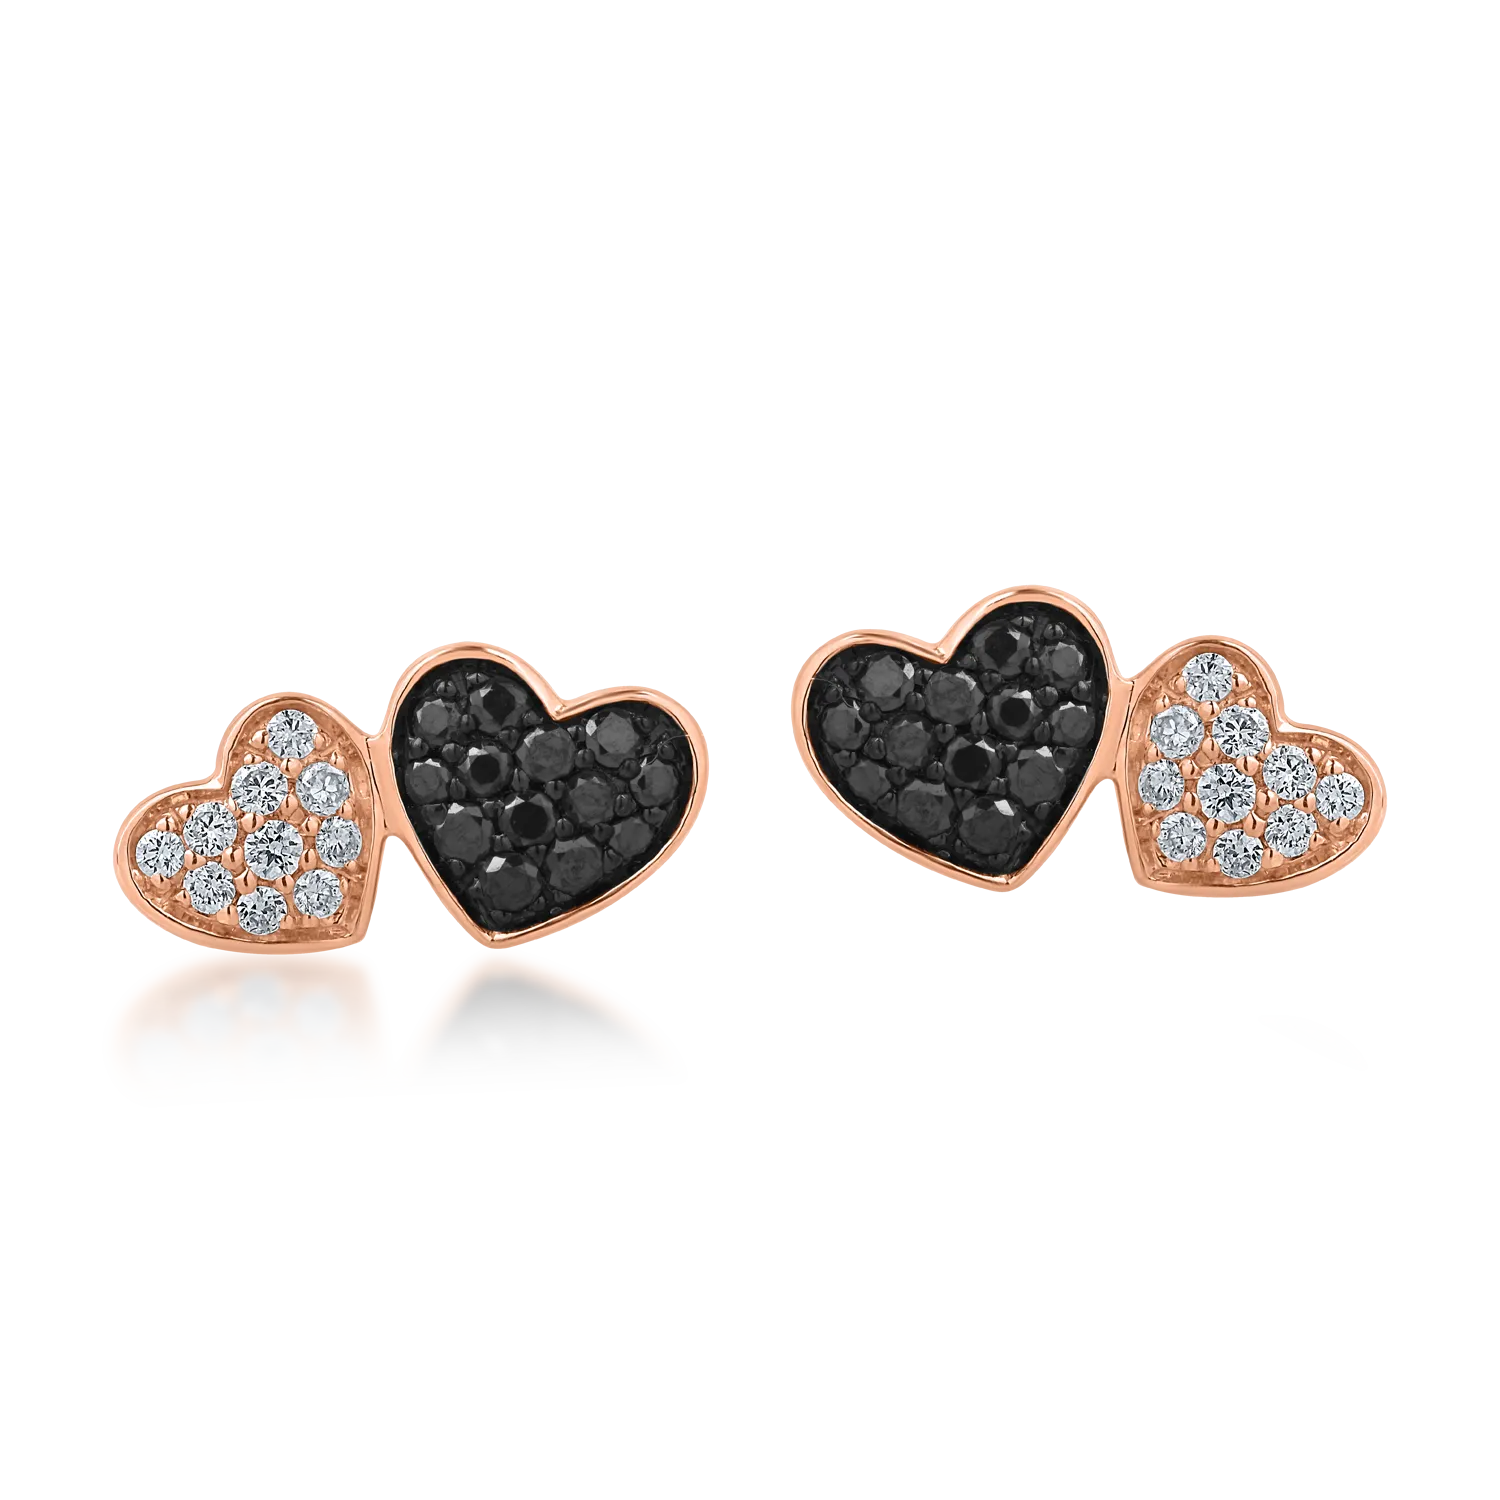 Rose gold heart earrings with 0.13ct black diamonds and 0.07ct clear diamonds